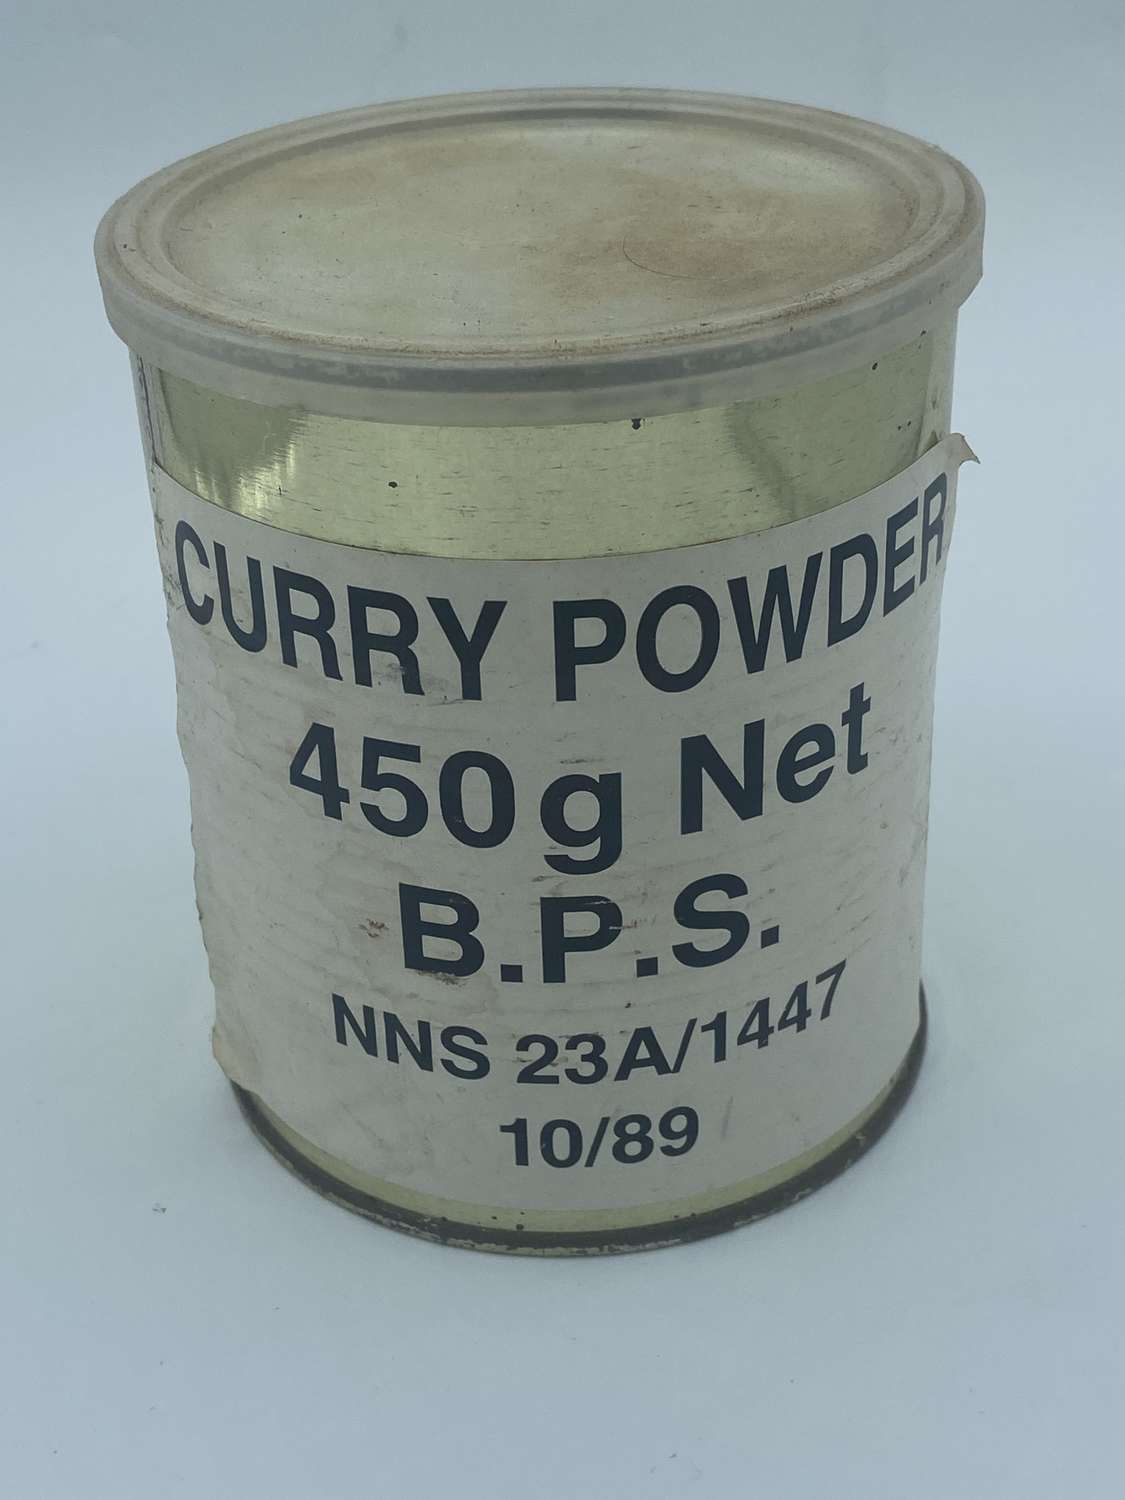 British Catering Corps 1980s Curry Powder 450g BPS Troops In Ireland